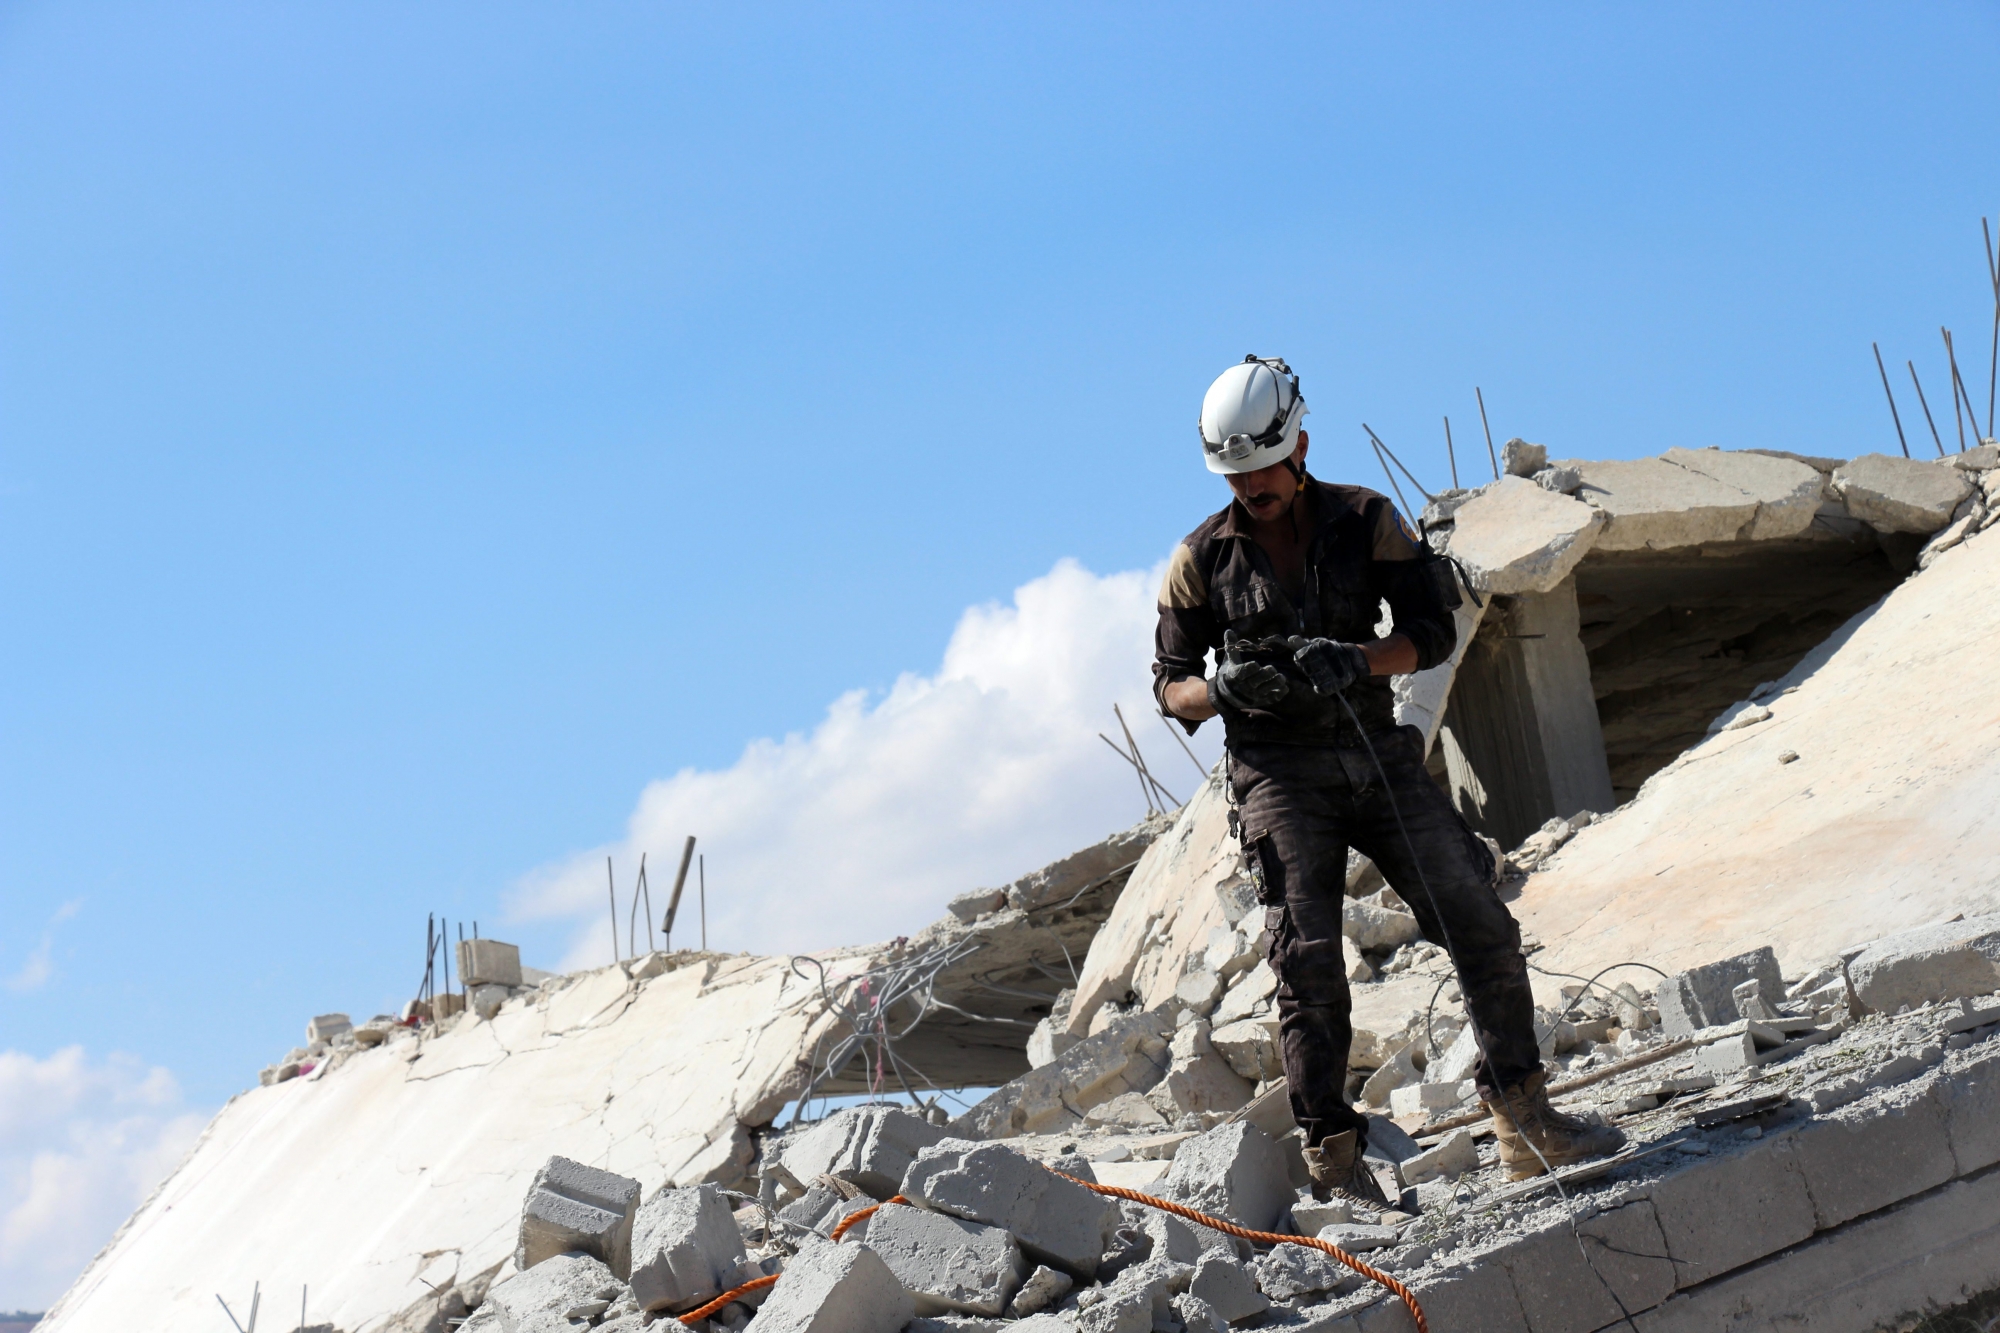 epa06903805 (FILE) - Volunteers with the White Helmets search for survivors in the rubble after an airstrike in Armanaz, a rural area of Idlib Province, northern Syria, 30 September 2017, (reissued 22 July 2018). Media reports on 22 July 2018 state that around 800 White Helmets personnel and their families have been evacuated to Jordan via Israel, The Israel Defense Forces said. The White Helmets are a Syrian Civil Defence volunteer organisation.  EPA/STR (FILE) SYRIA CONFLICT WHITE HELMETS